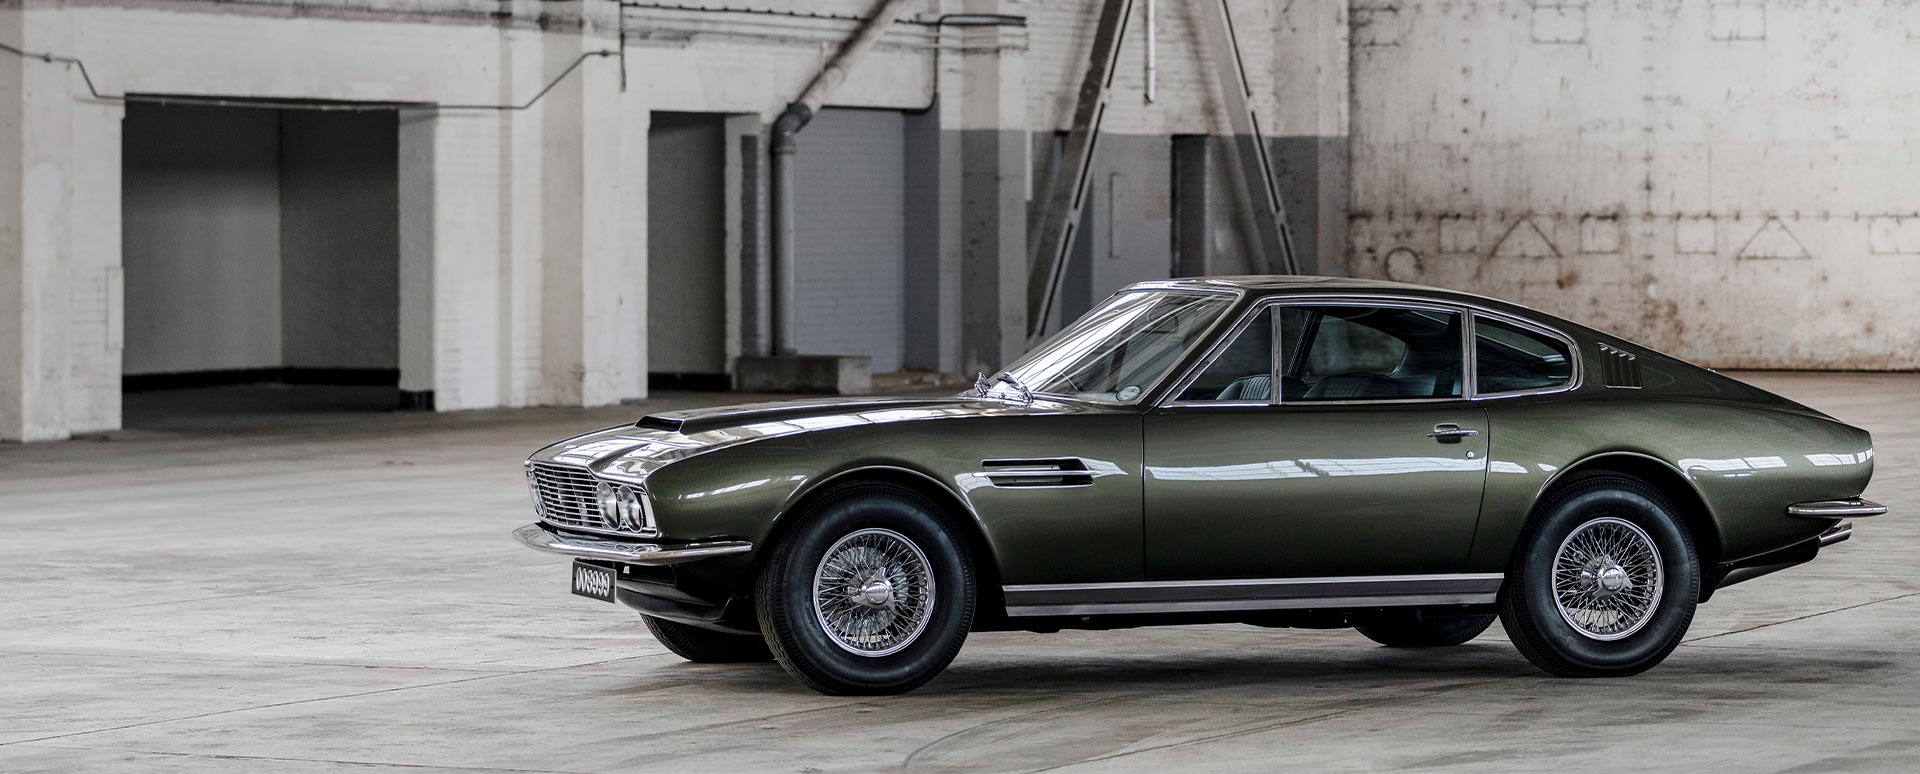 Three Generations of Perfection: The Aston Martin DBS